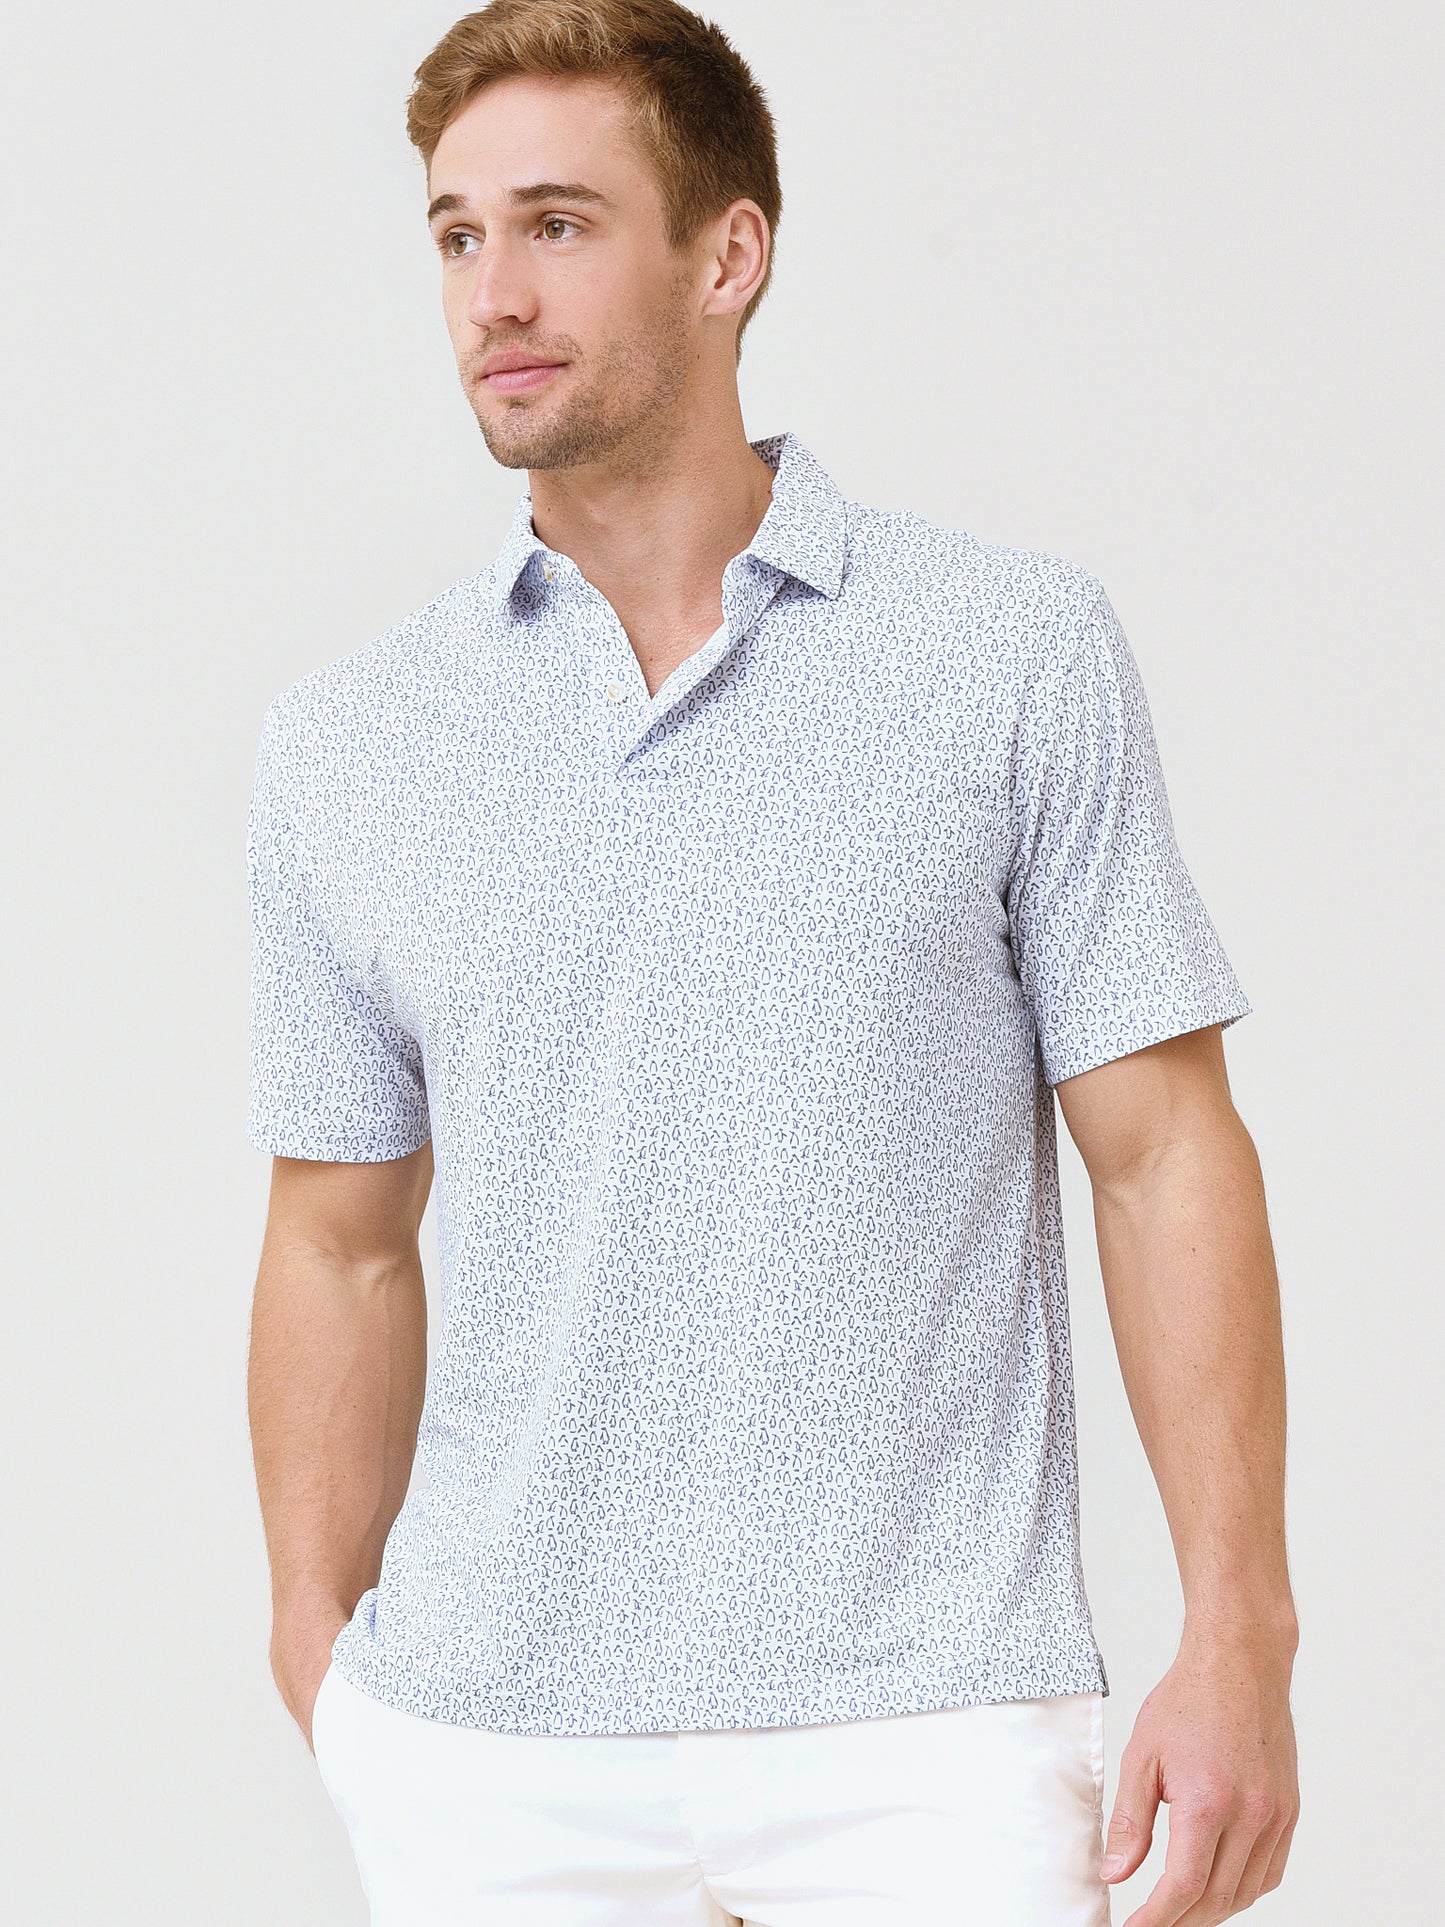 Peter Millar Seaside Men's Drirelease® Natural Touch Penguins Polo